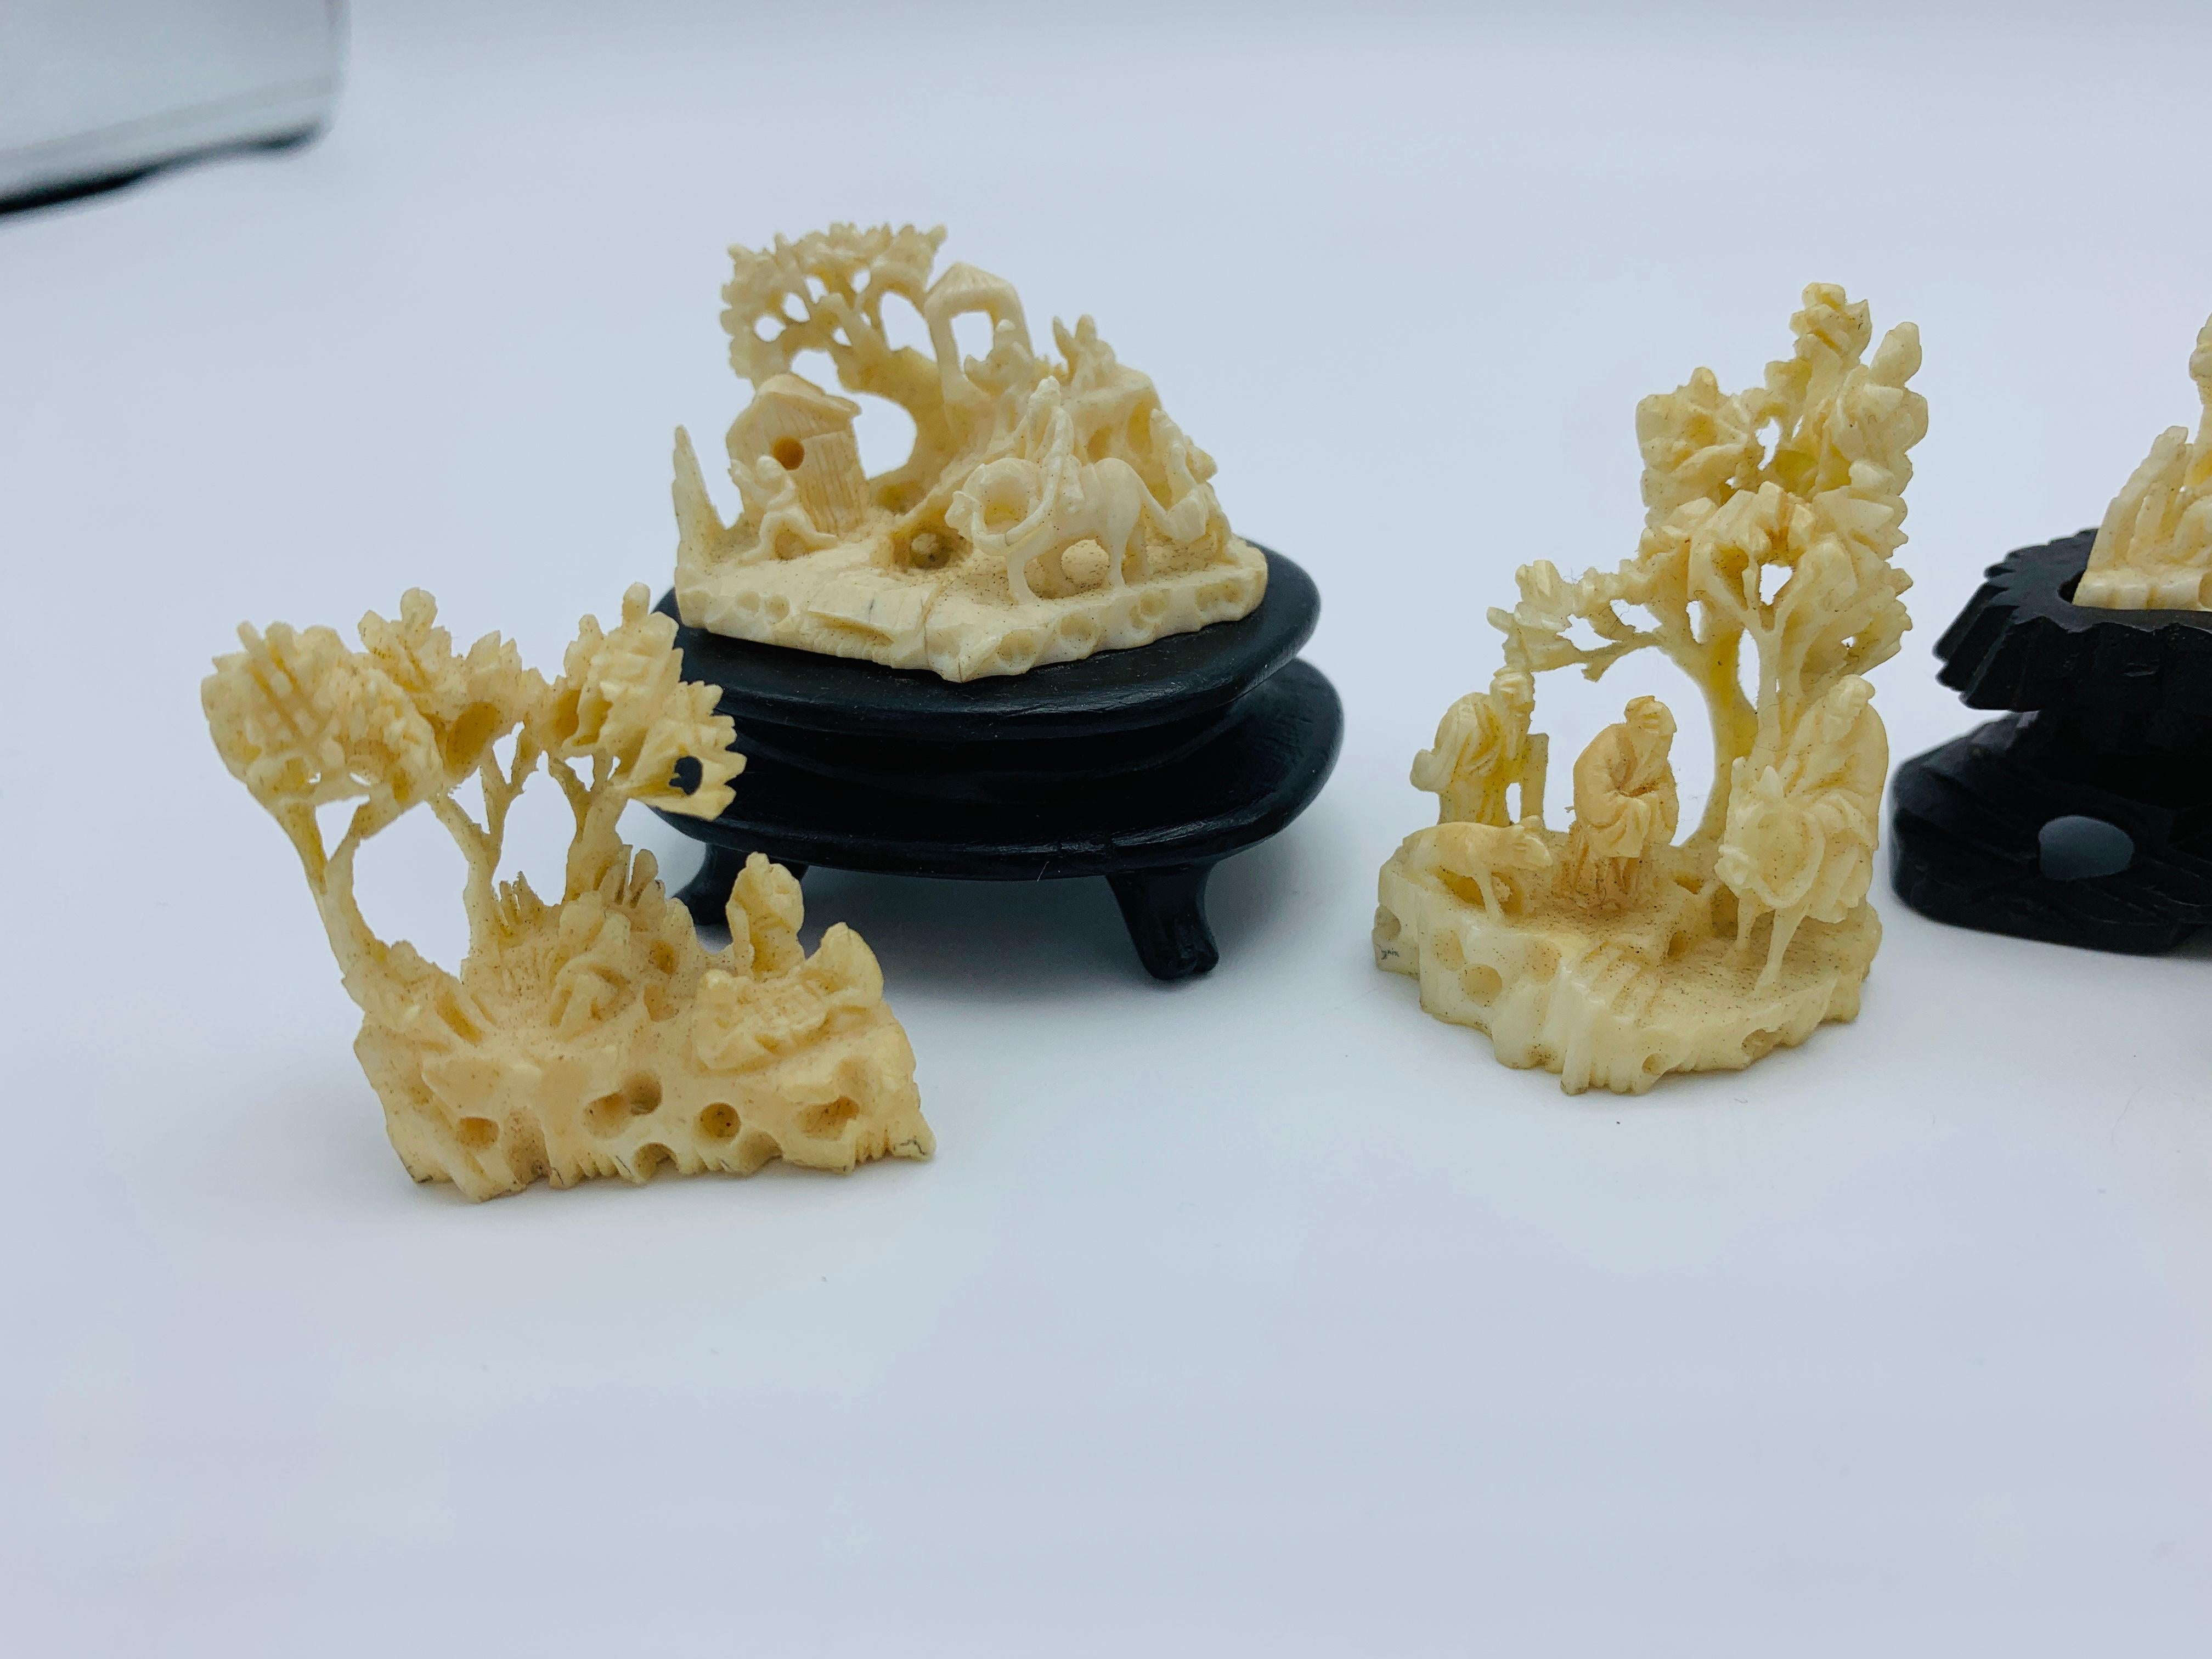 Listed is an absolutely stunning, set of nine, 1960s faux ivory resin sculptures. This miniature set includes nine carved sculptures of ornate scenes of pagodas, figures, bonsai trees, and other ornate foliage. Set includes three stands, perfectly